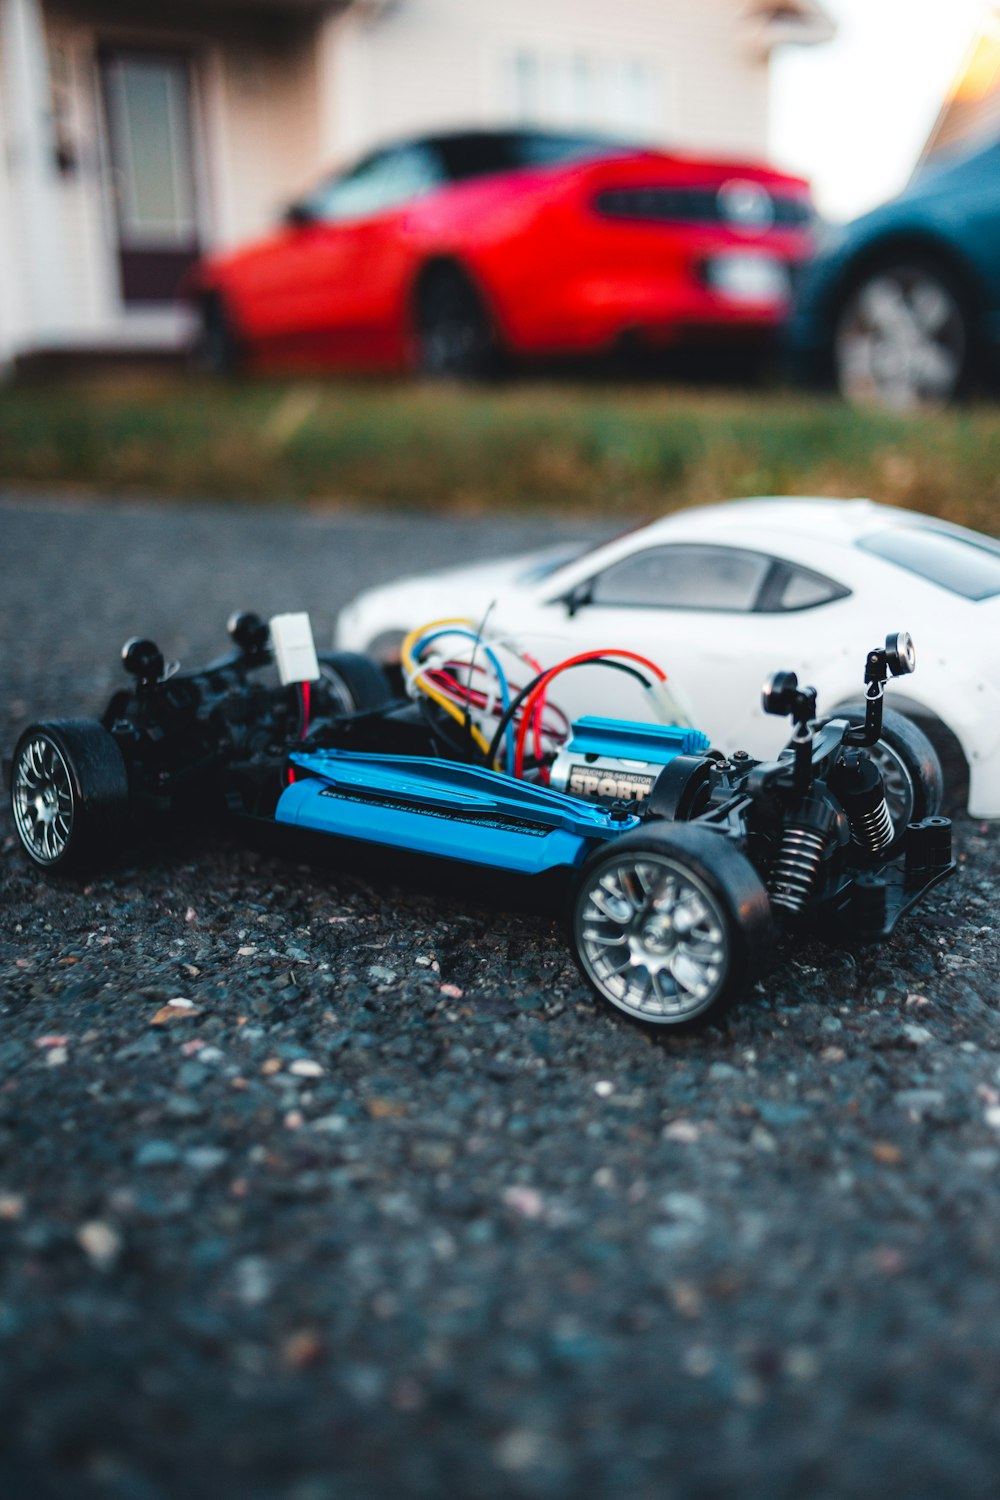 a toy car on the ground